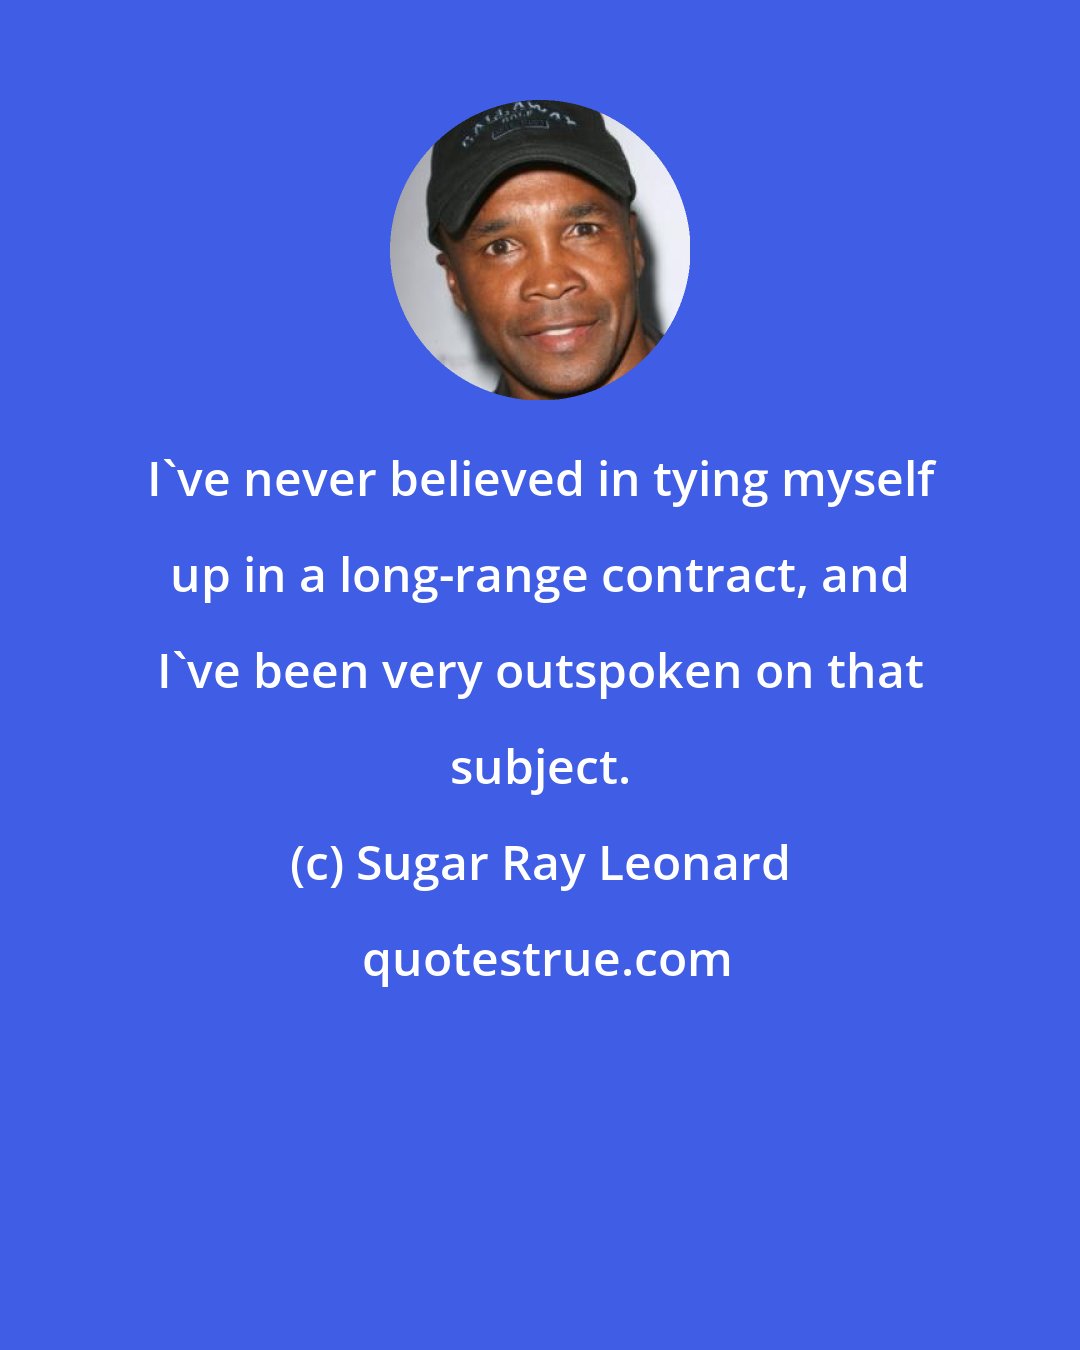 Sugar Ray Leonard: I've never believed in tying myself up in a long-range contract, and I've been very outspoken on that subject.